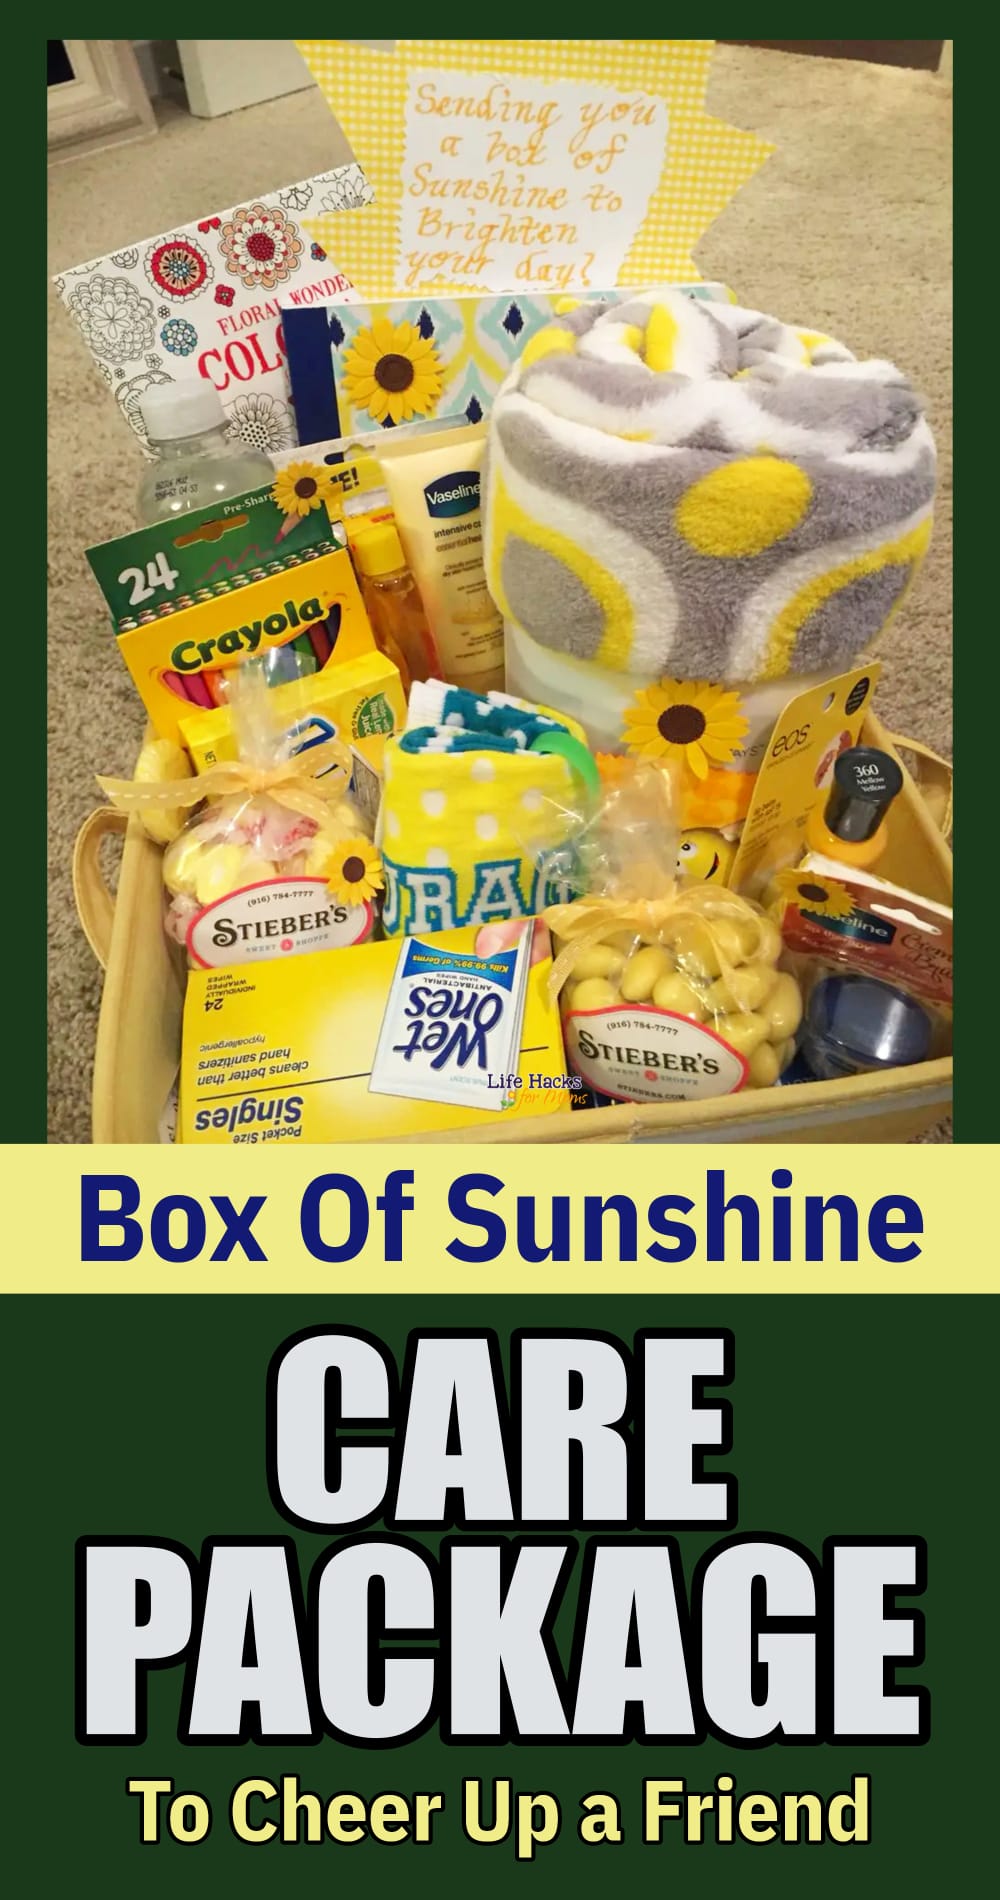 yellow care package - box of sunshine gift basket to cheer up a friend or as a homemade sympathy gift basket